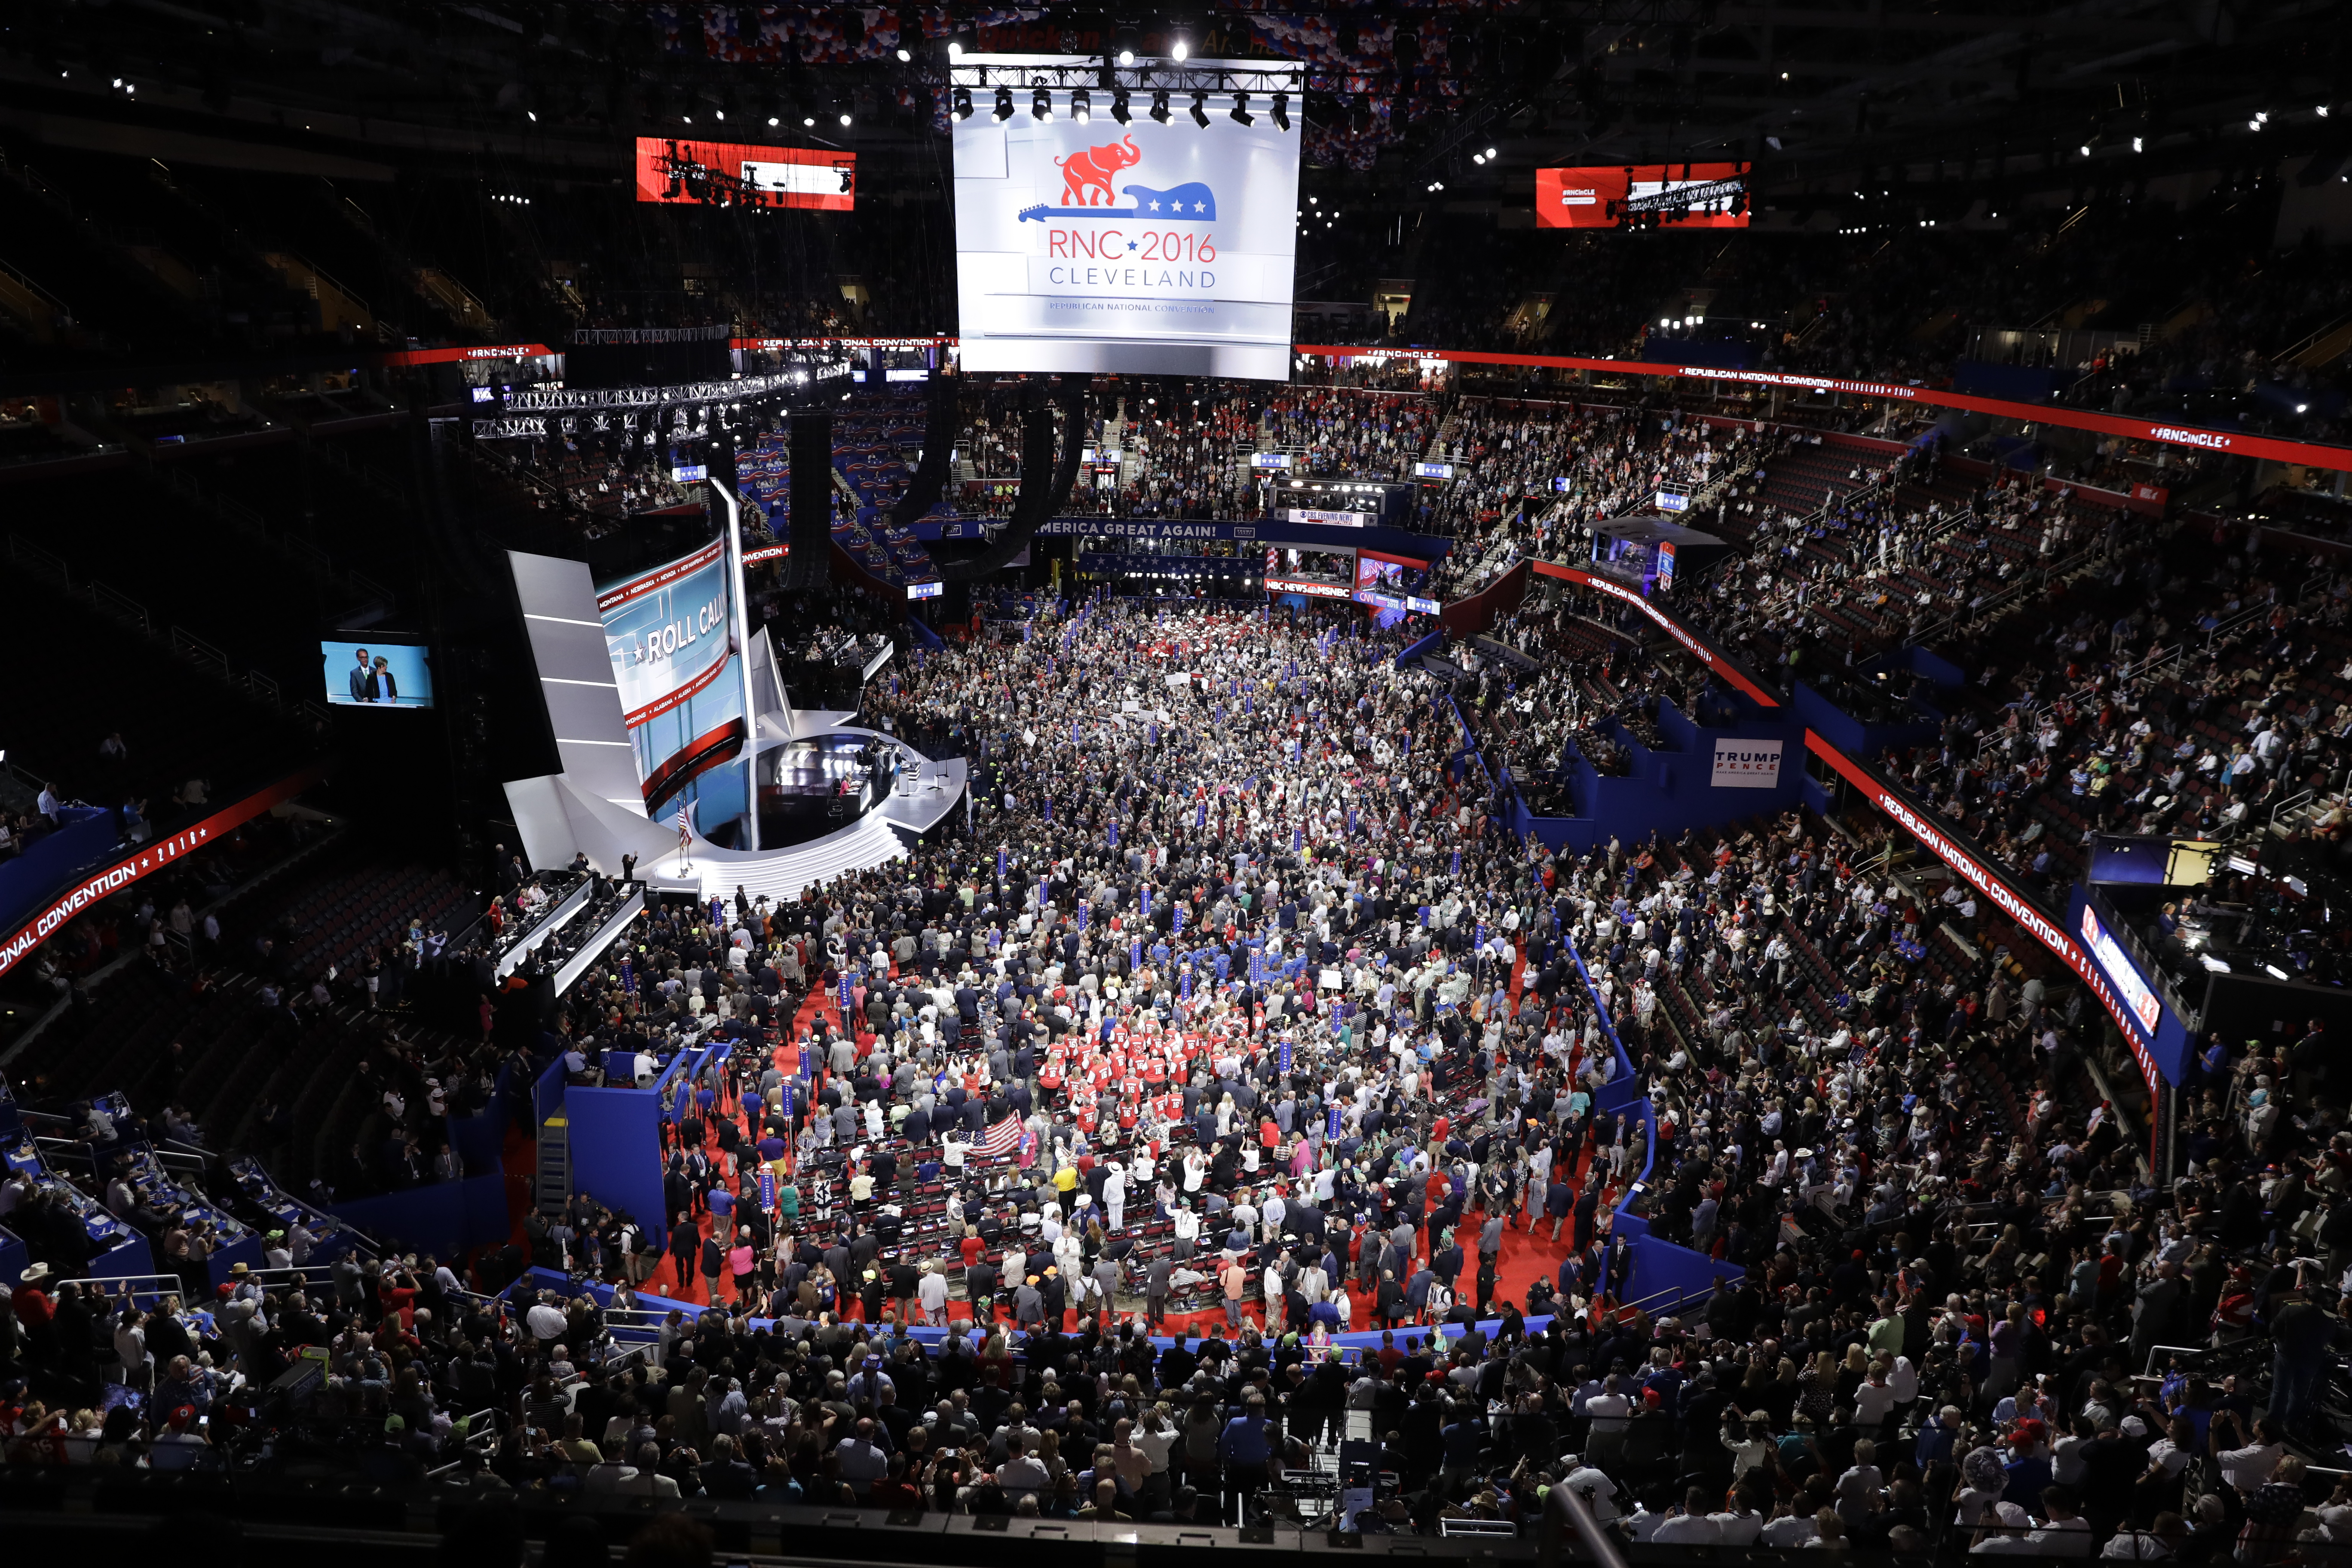 Delegates fill the floor during the second day session of the Republican National Convention in Cleveland, Tuesday, July 19, 2016. (AP Photo/Matt Rourke)